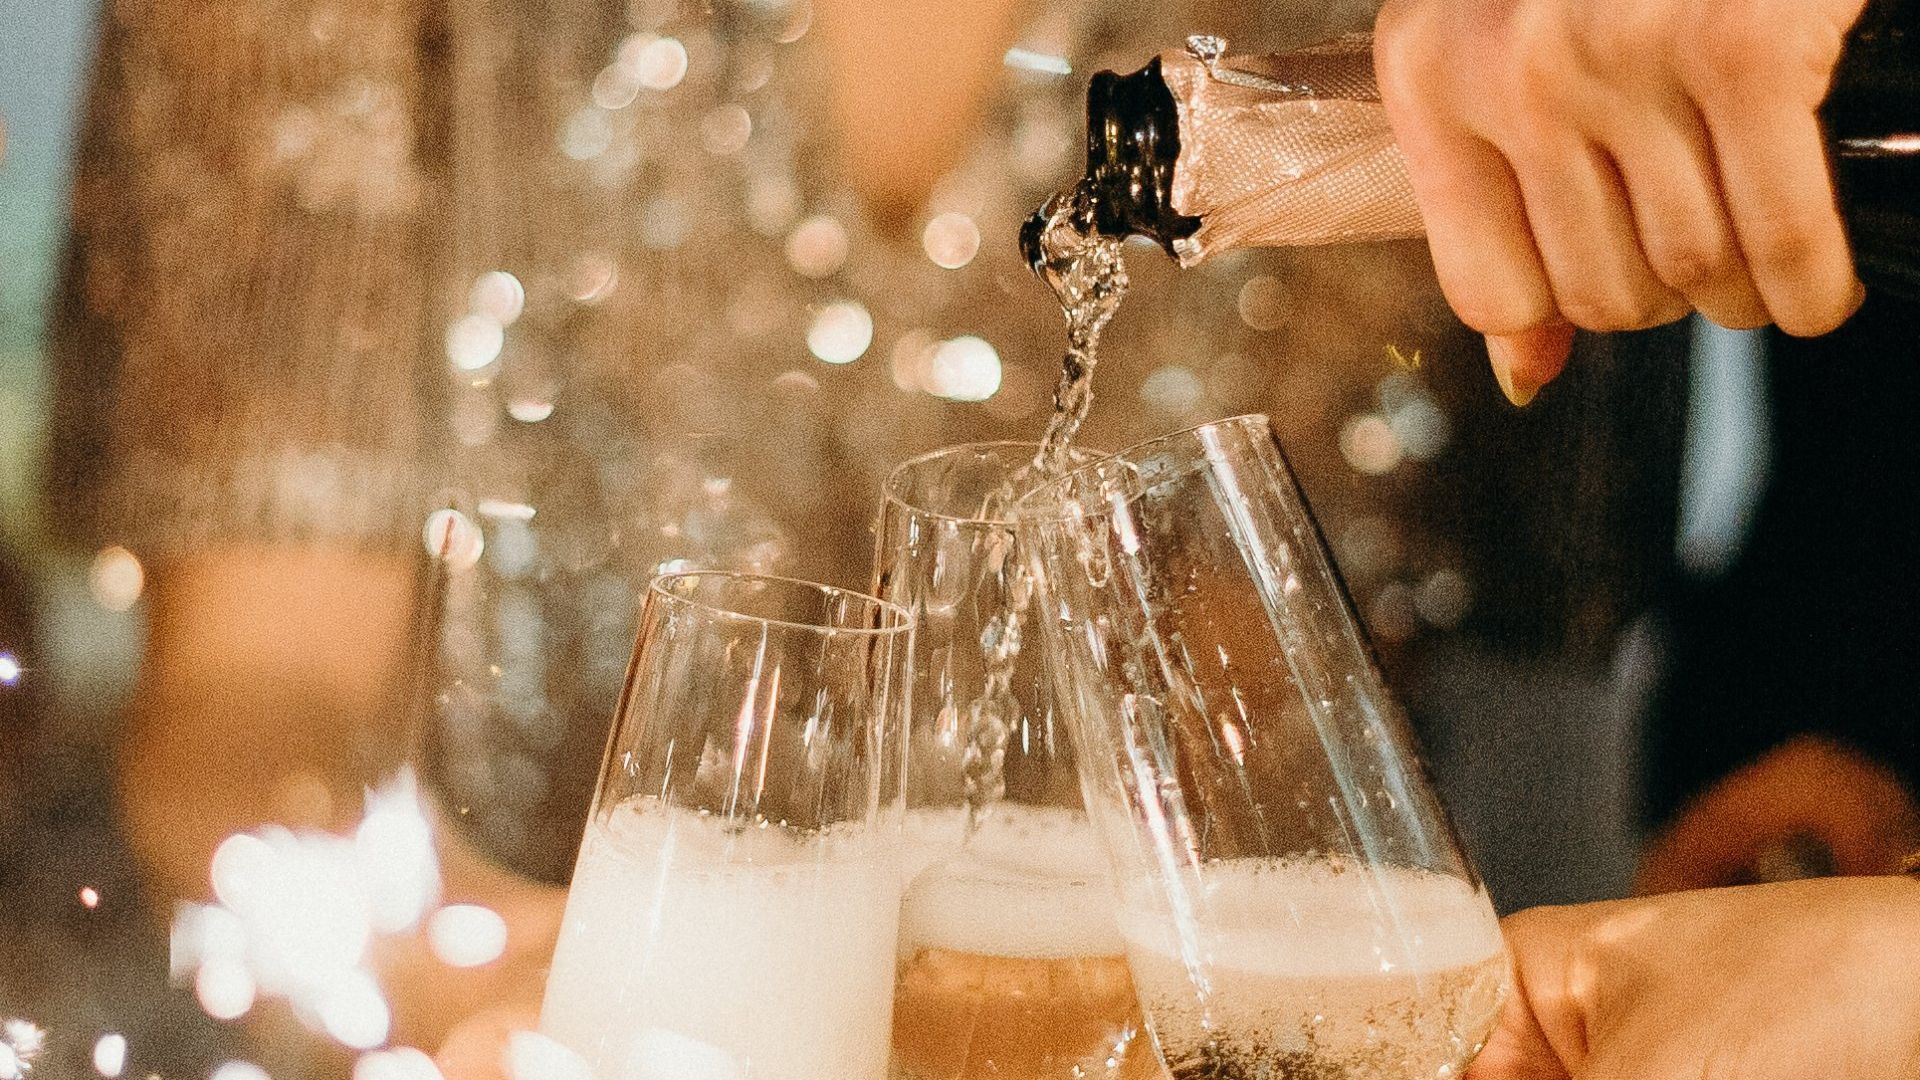 A person is pouring champagne into a glass at a party.